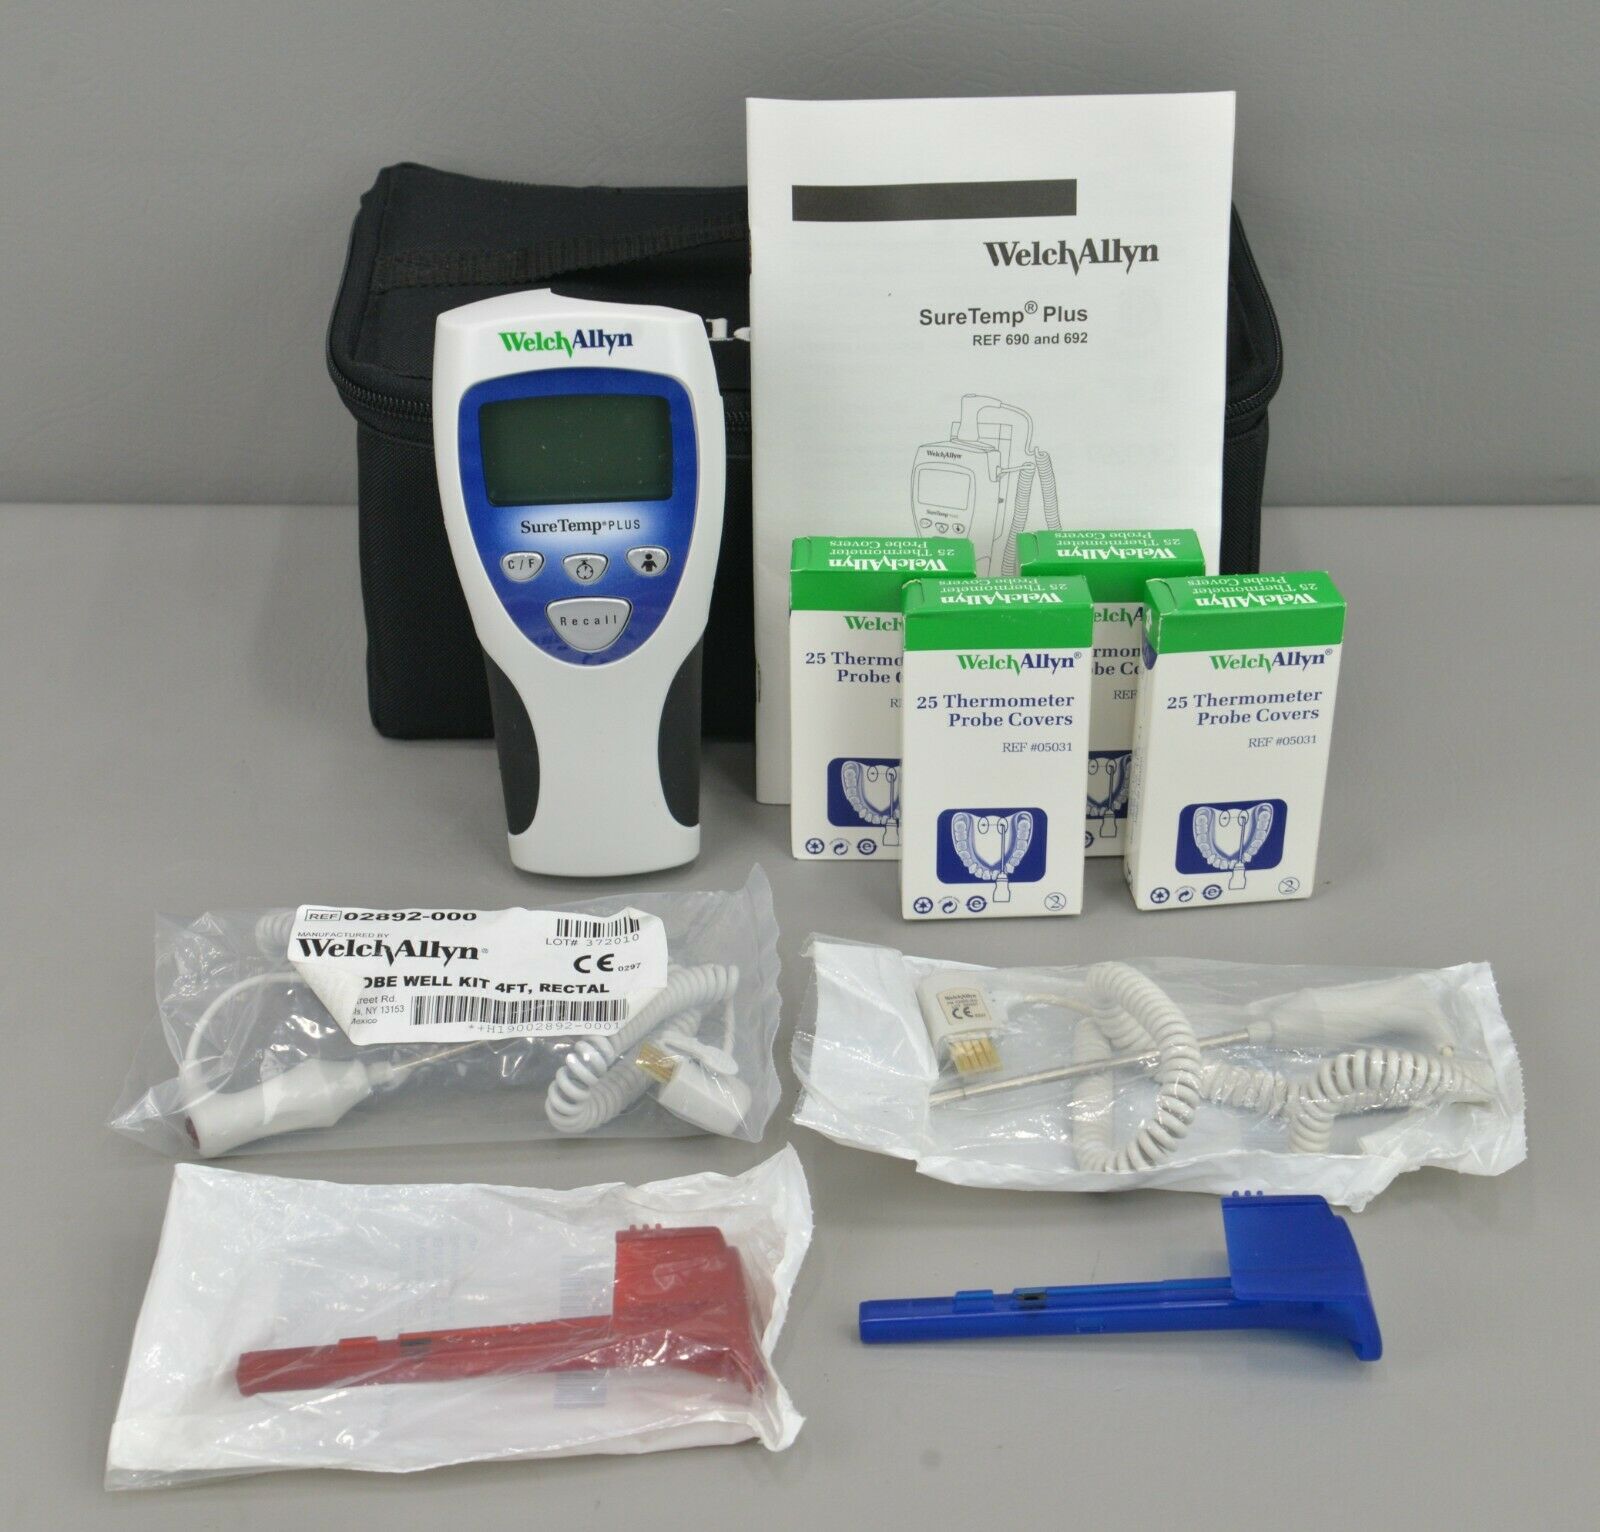 https://www.rhinotradellc.com/wp-content/uploads/imported/6/Welch-Allyn-Model-692-SureTemp-Plus-Thermometer-w-Oral-Rectal-Probes-Case-255330310656.JPG